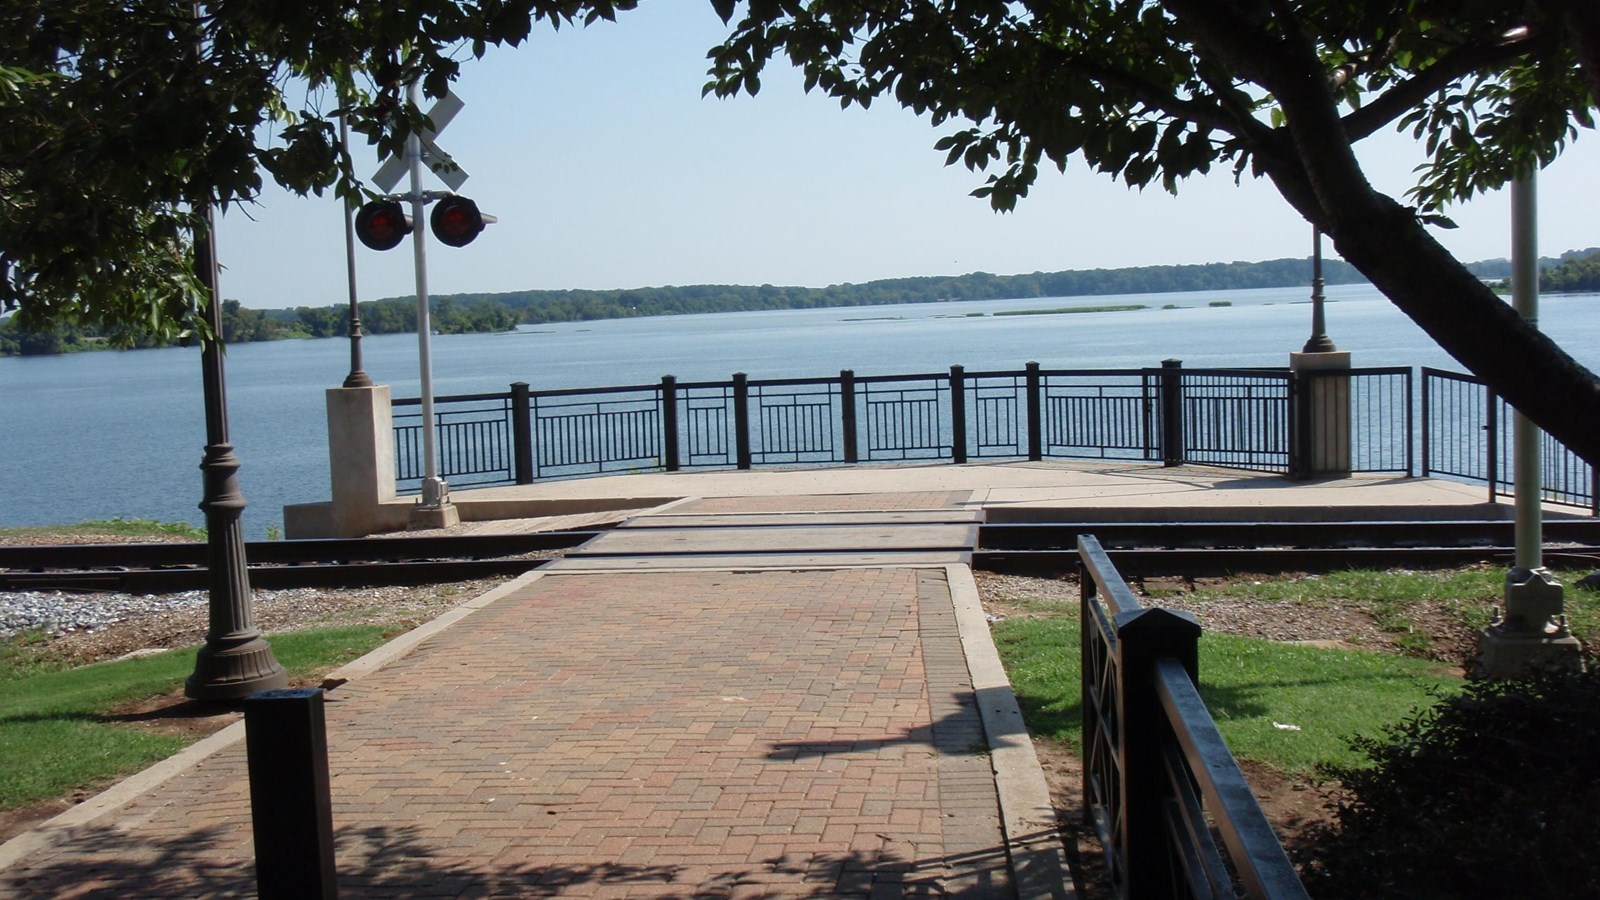 A red brick path leads out to a viewpoint over an expansive lake.